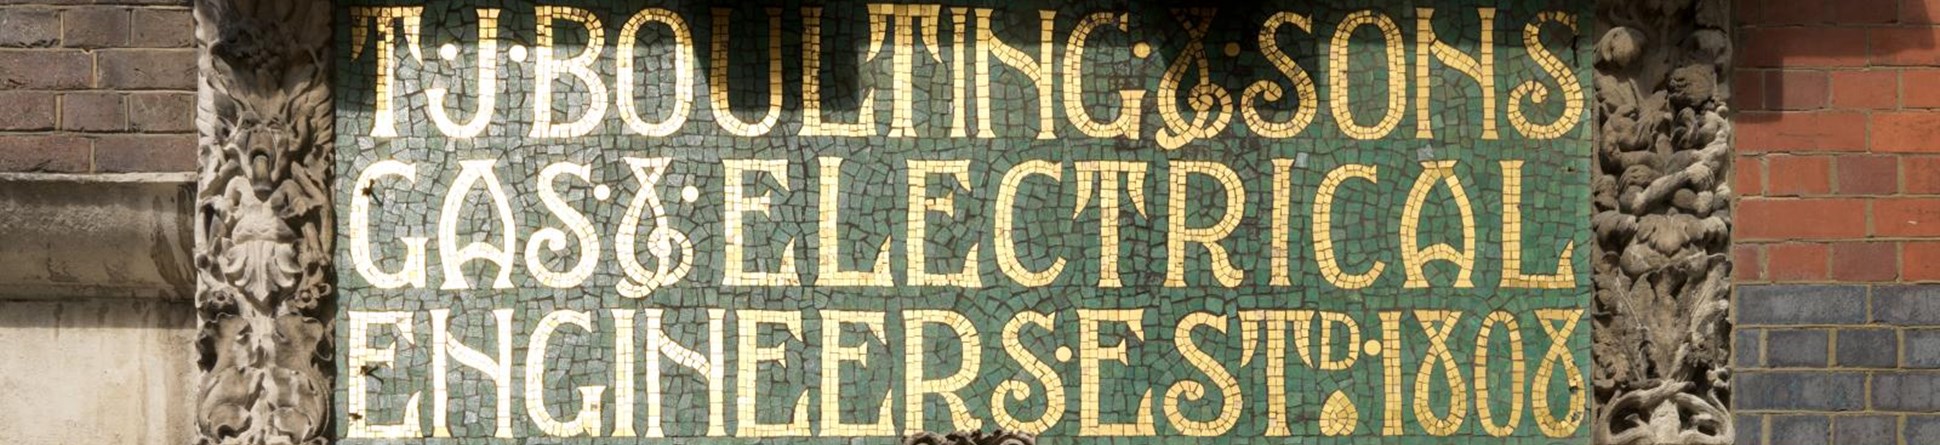 Signage in gold letters with green background. The signage is surrounded by brickwork and other architectural features